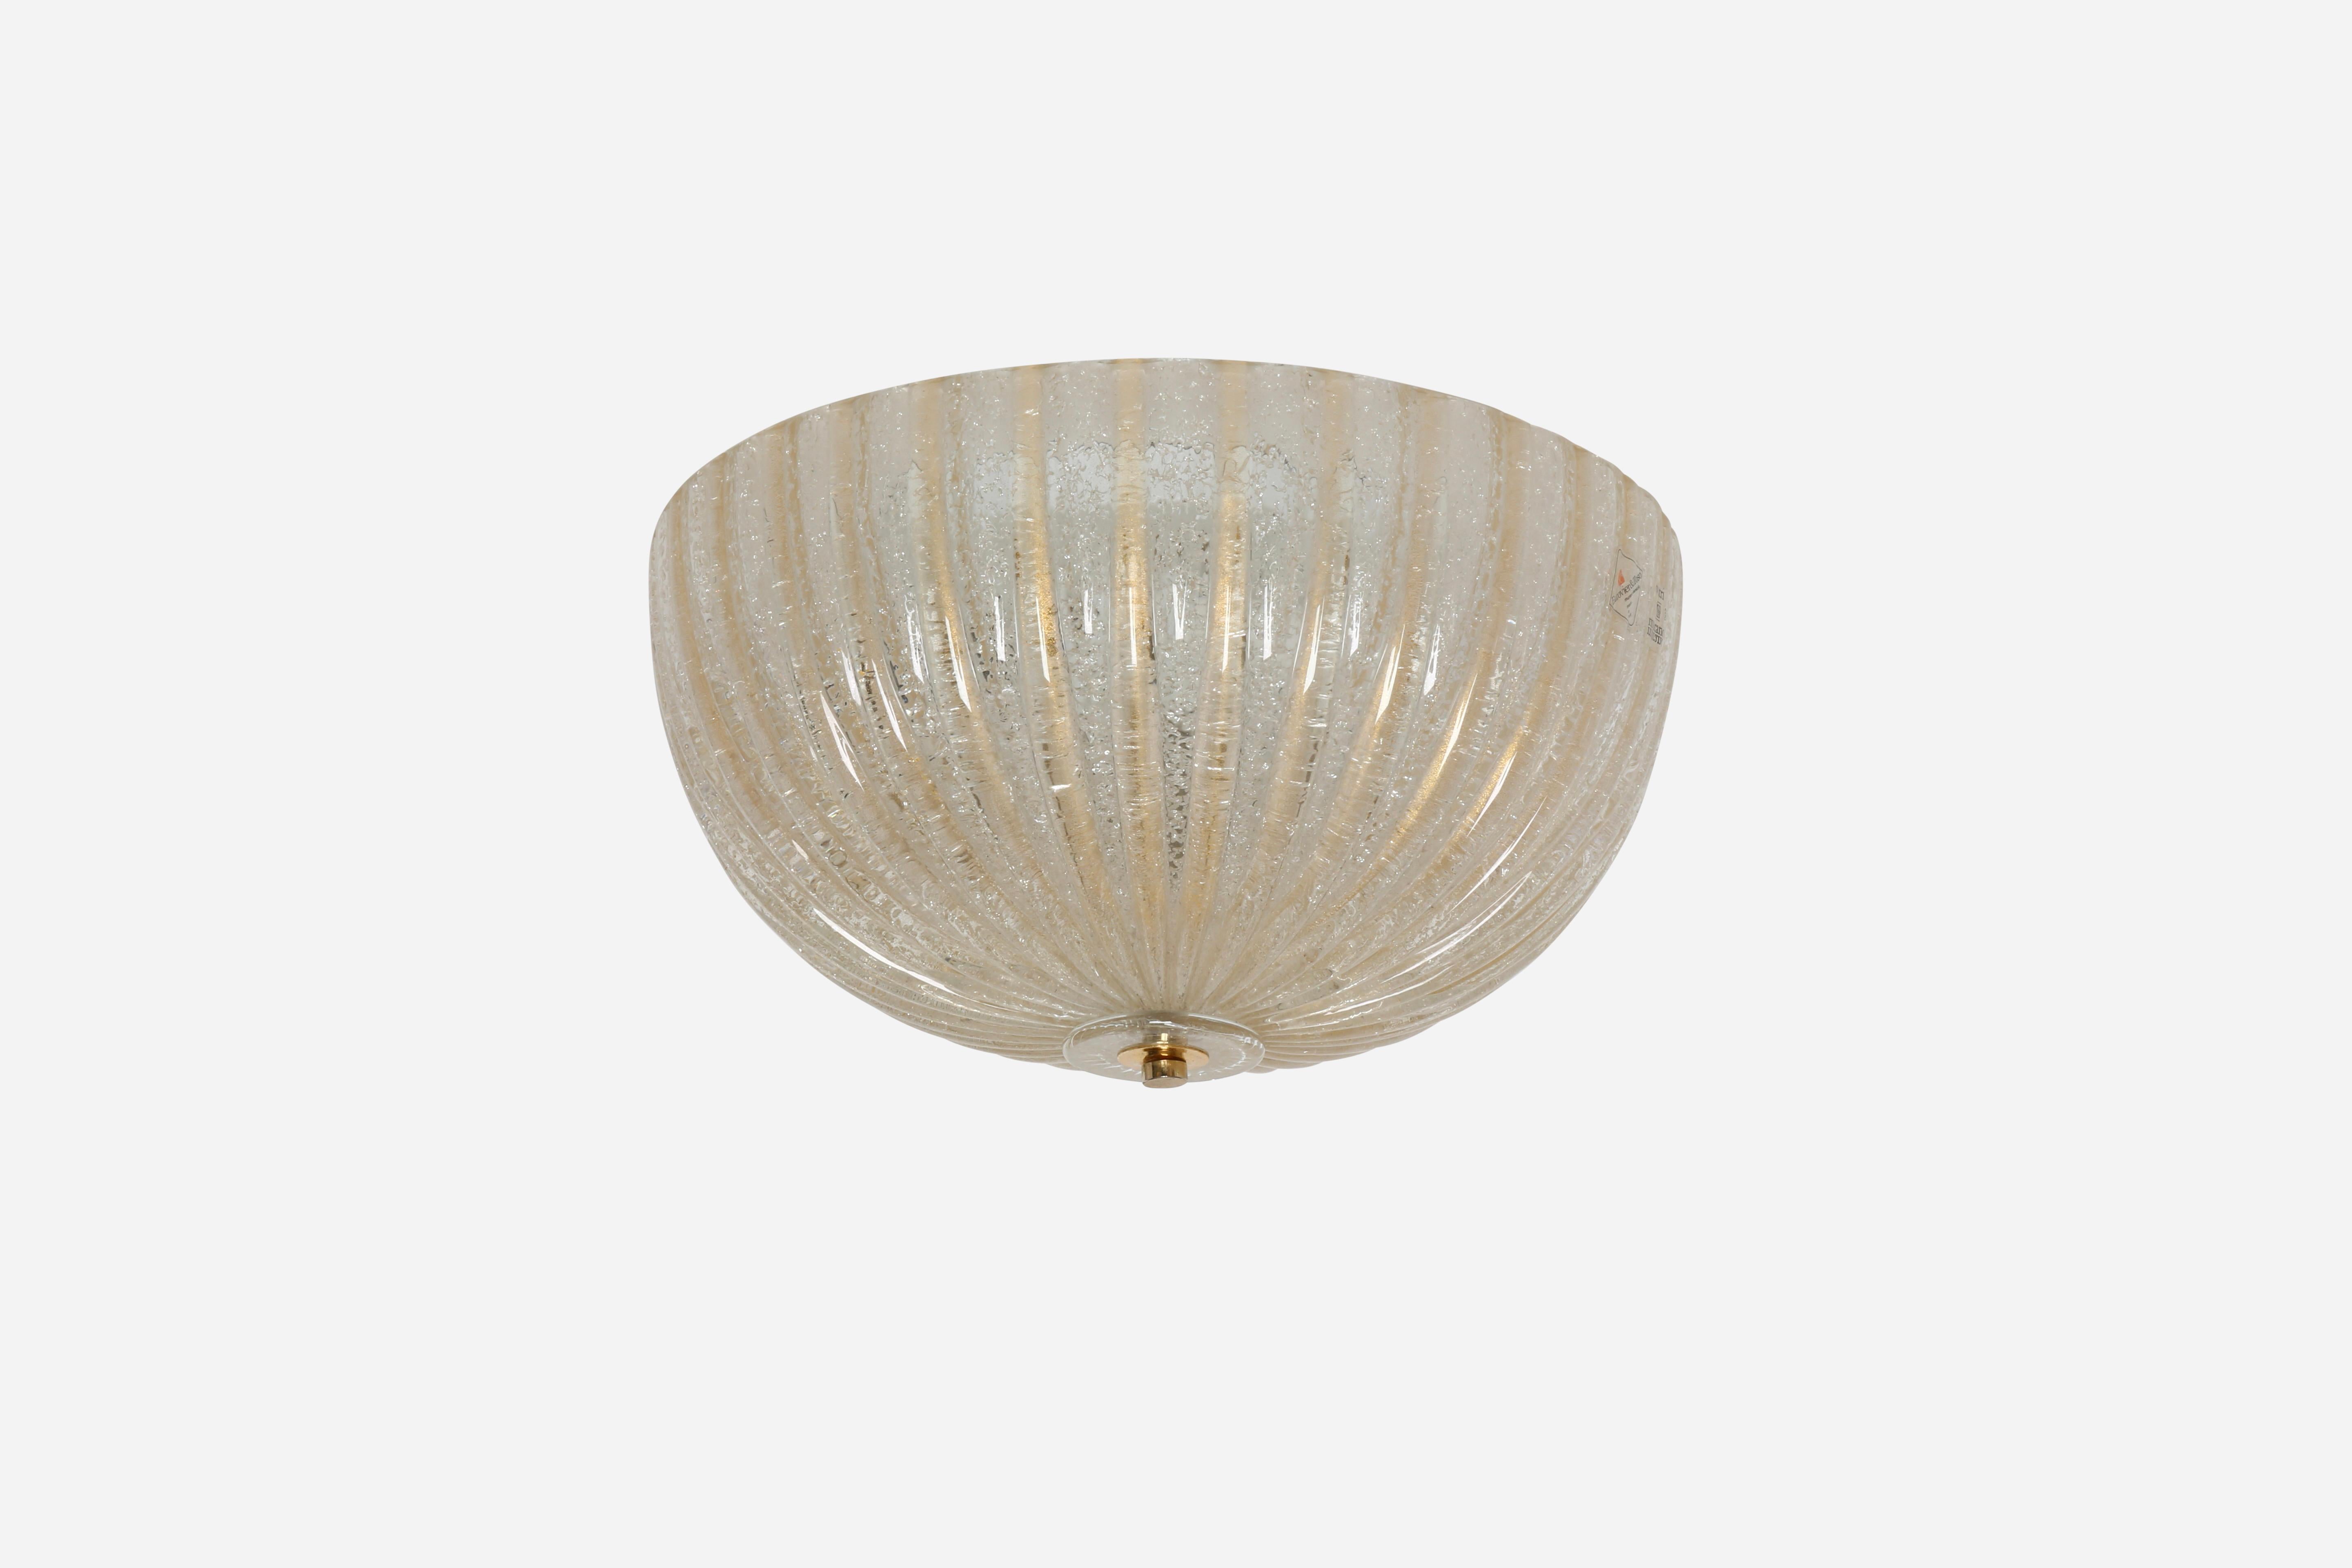 Murano glass flush mount ceiling light by Barovier & Toso.
Designed and made in Italy in 1970s.
Hand blown Murano glass with gold leaf inclusions.
Labeled with sticker.
Three candelabra bulbs. 
Complimentary US rewiring upon request.